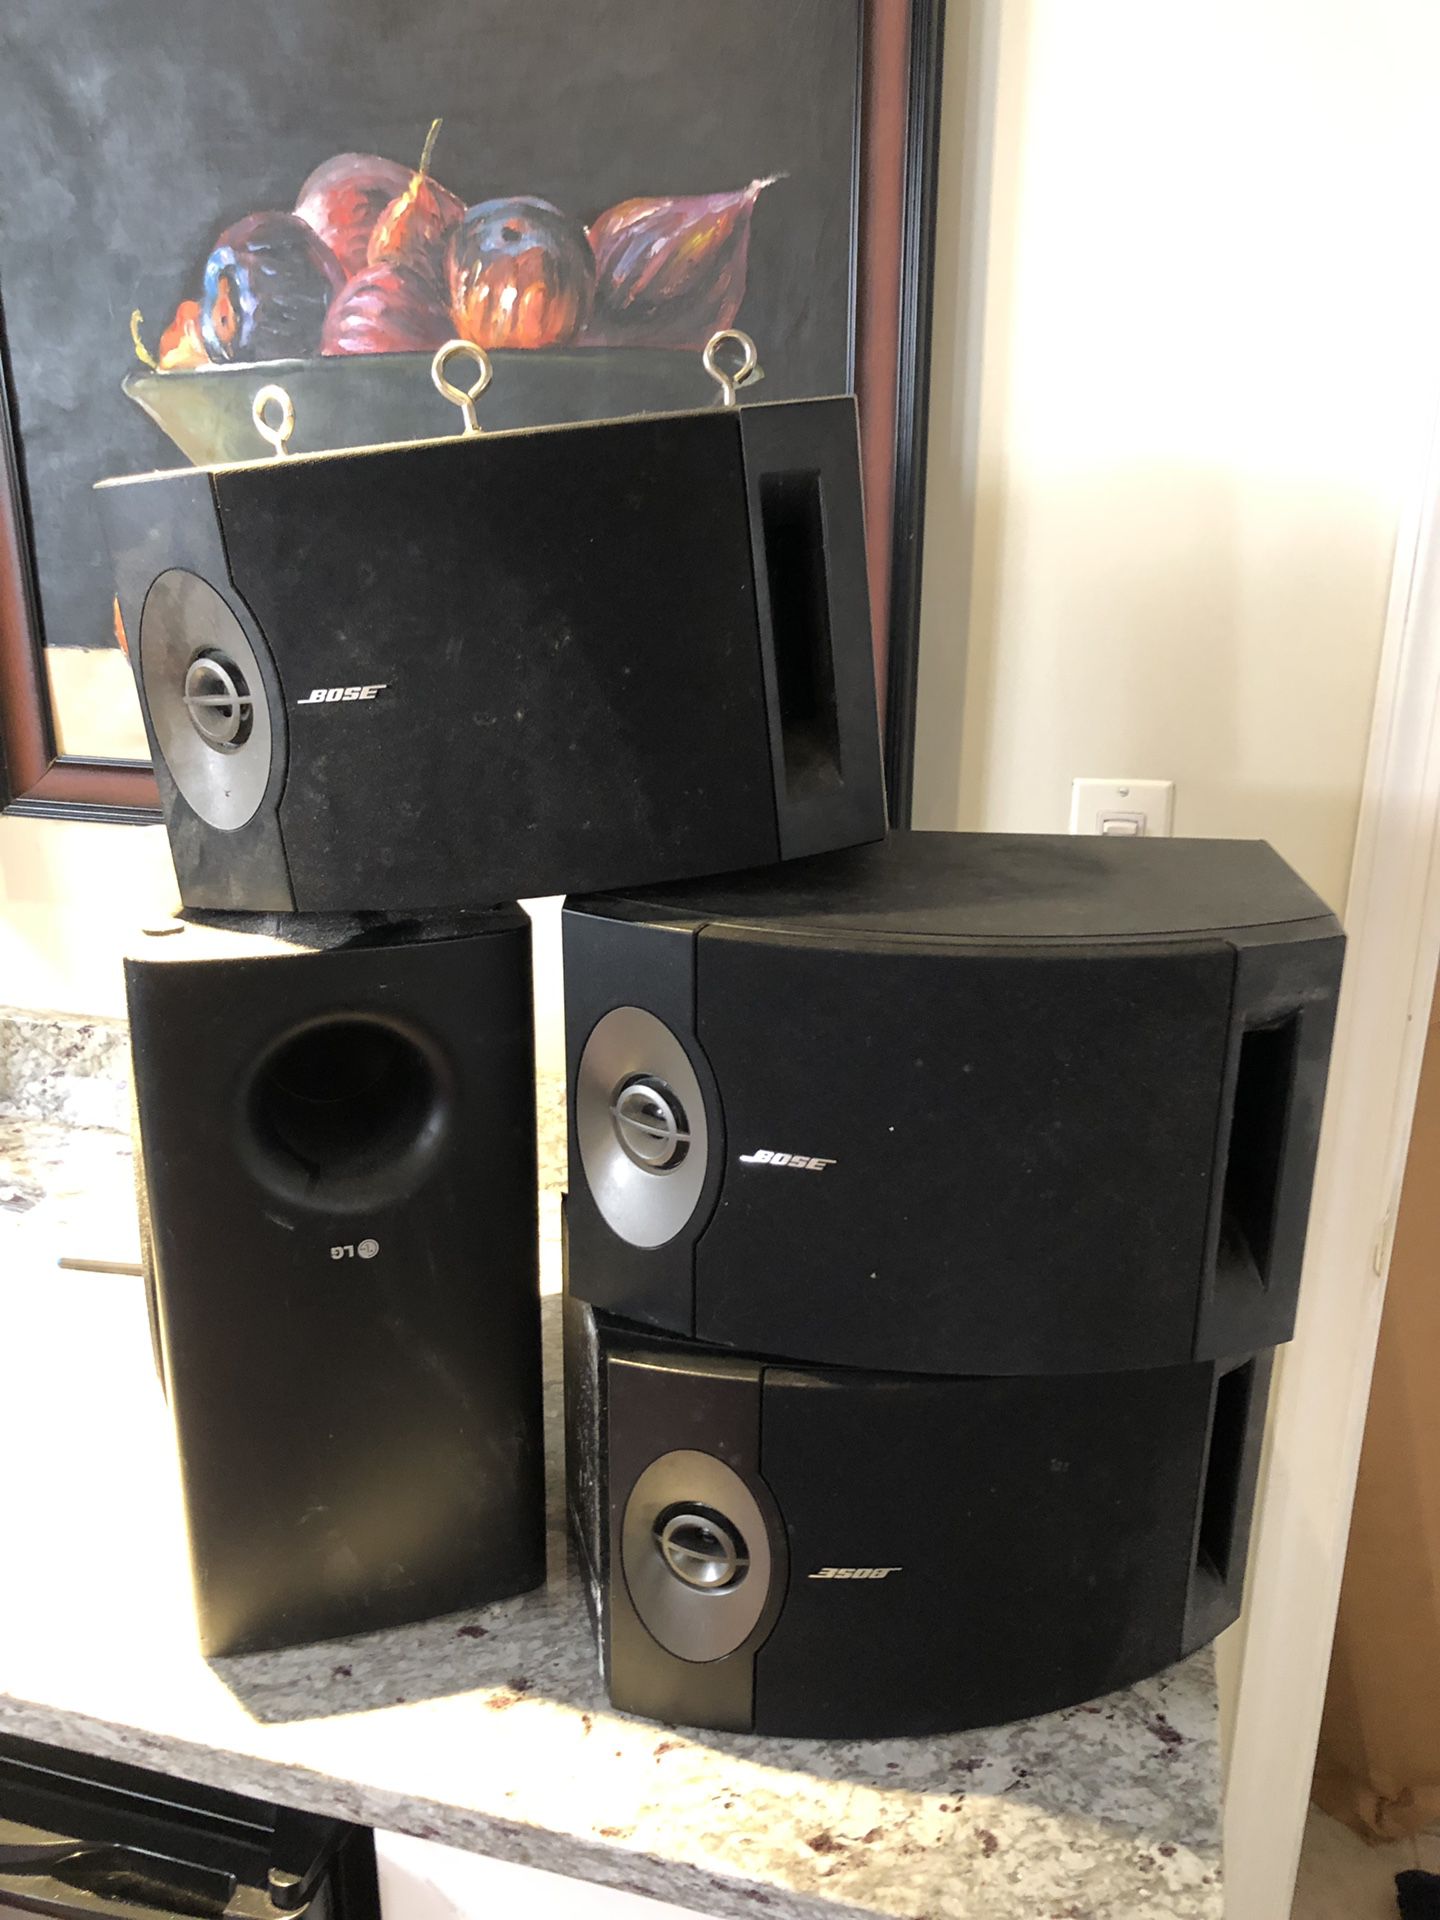 3 Bose speakers and LG sub